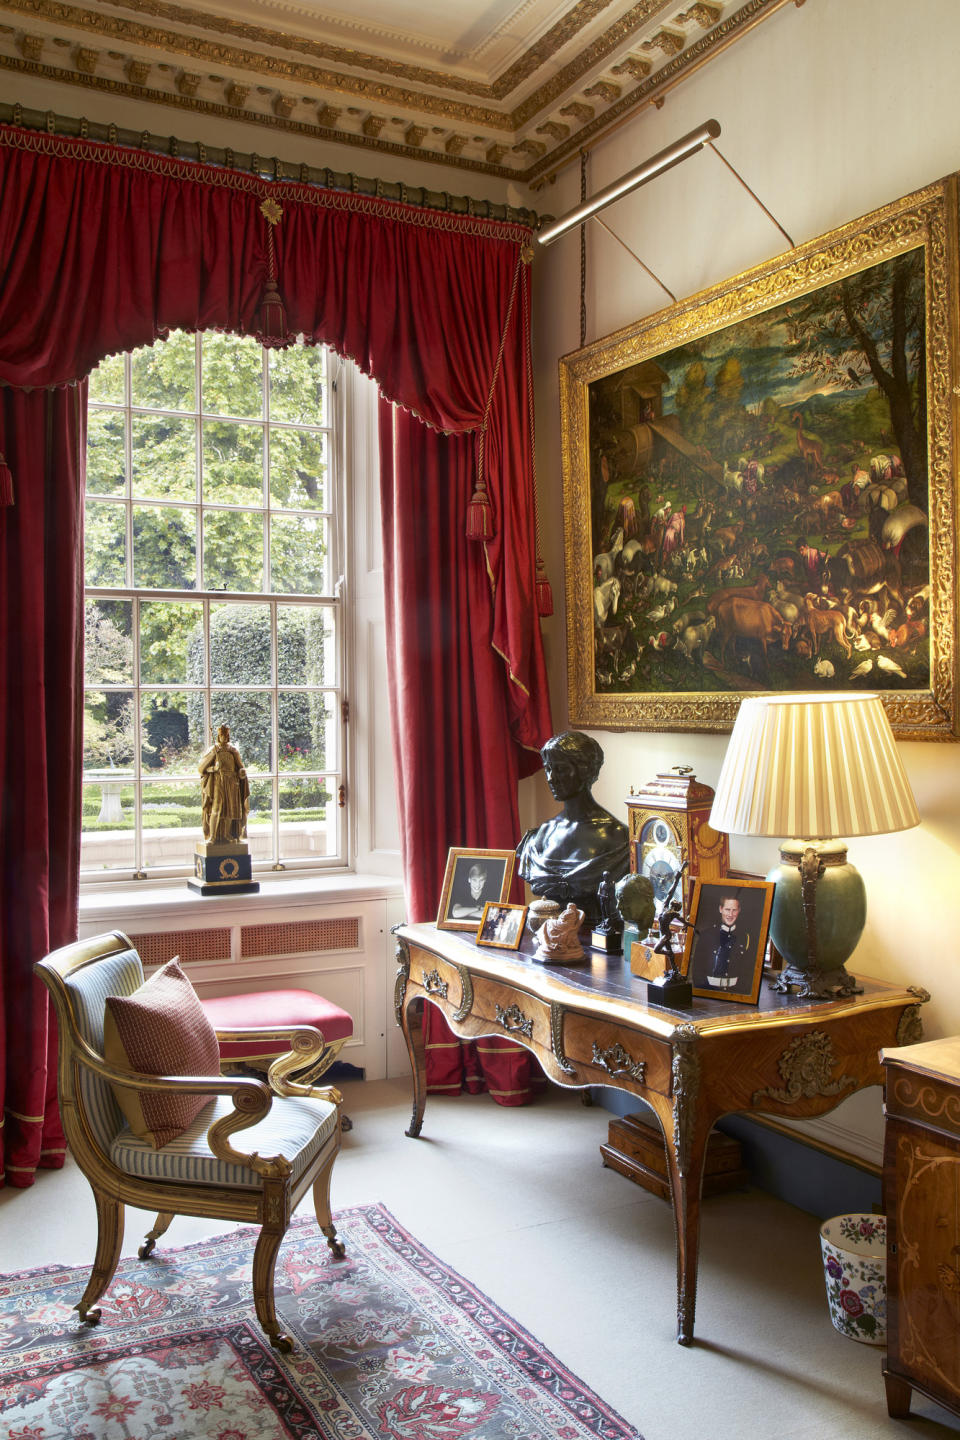 Inside The Garden Room in Clarence House. Photo: Twitter/ClarenceHouse.